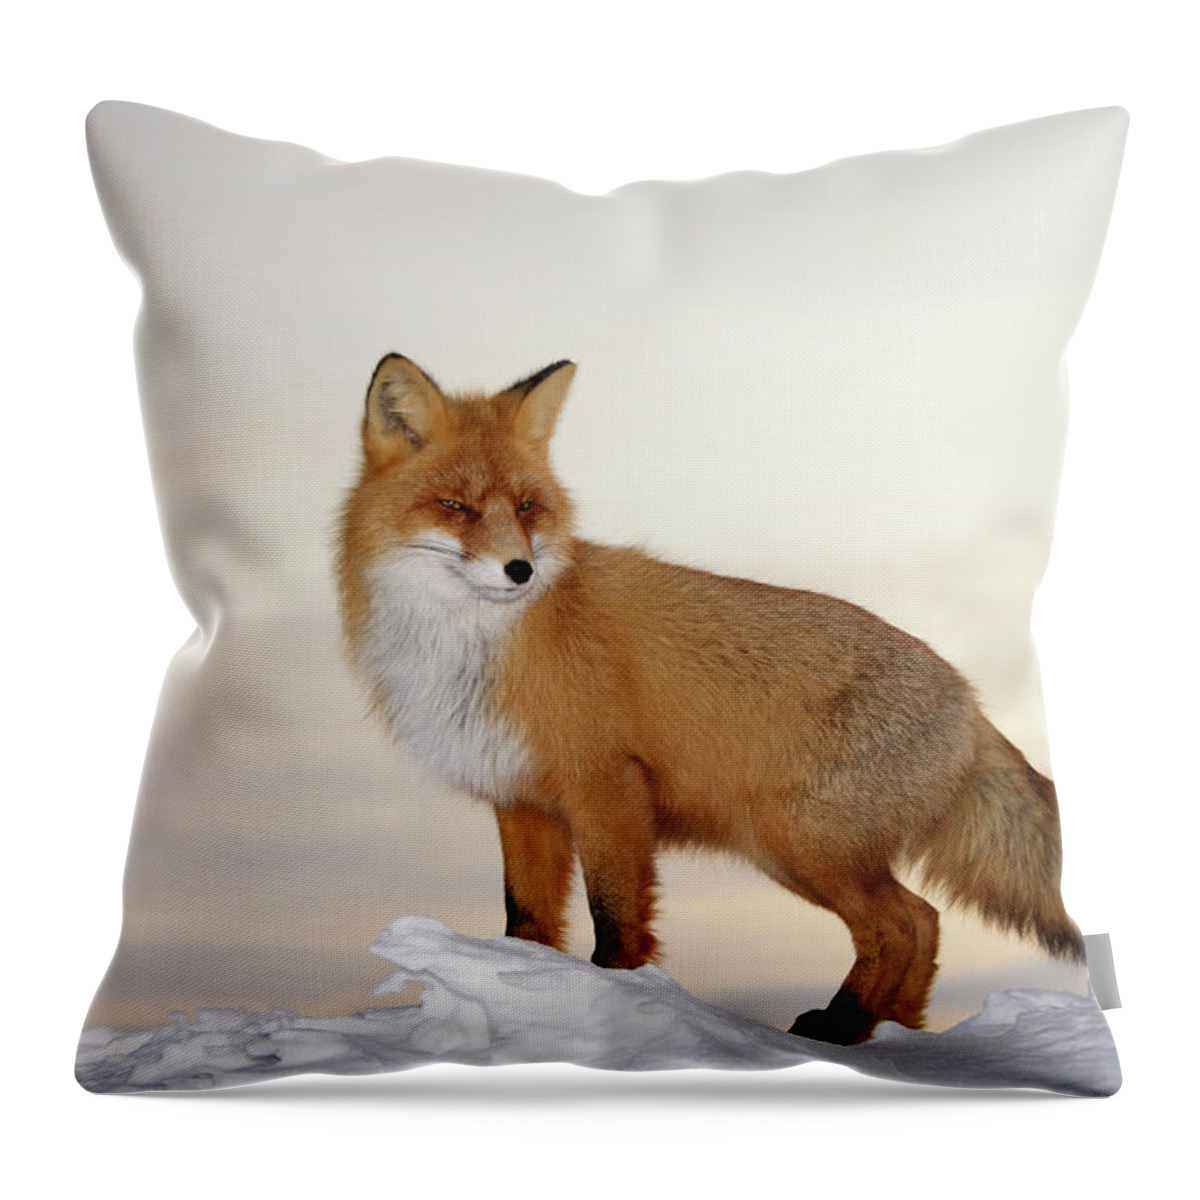 Black Color Throw Pillow featuring the photograph Majestic Fox by Dmitrynd